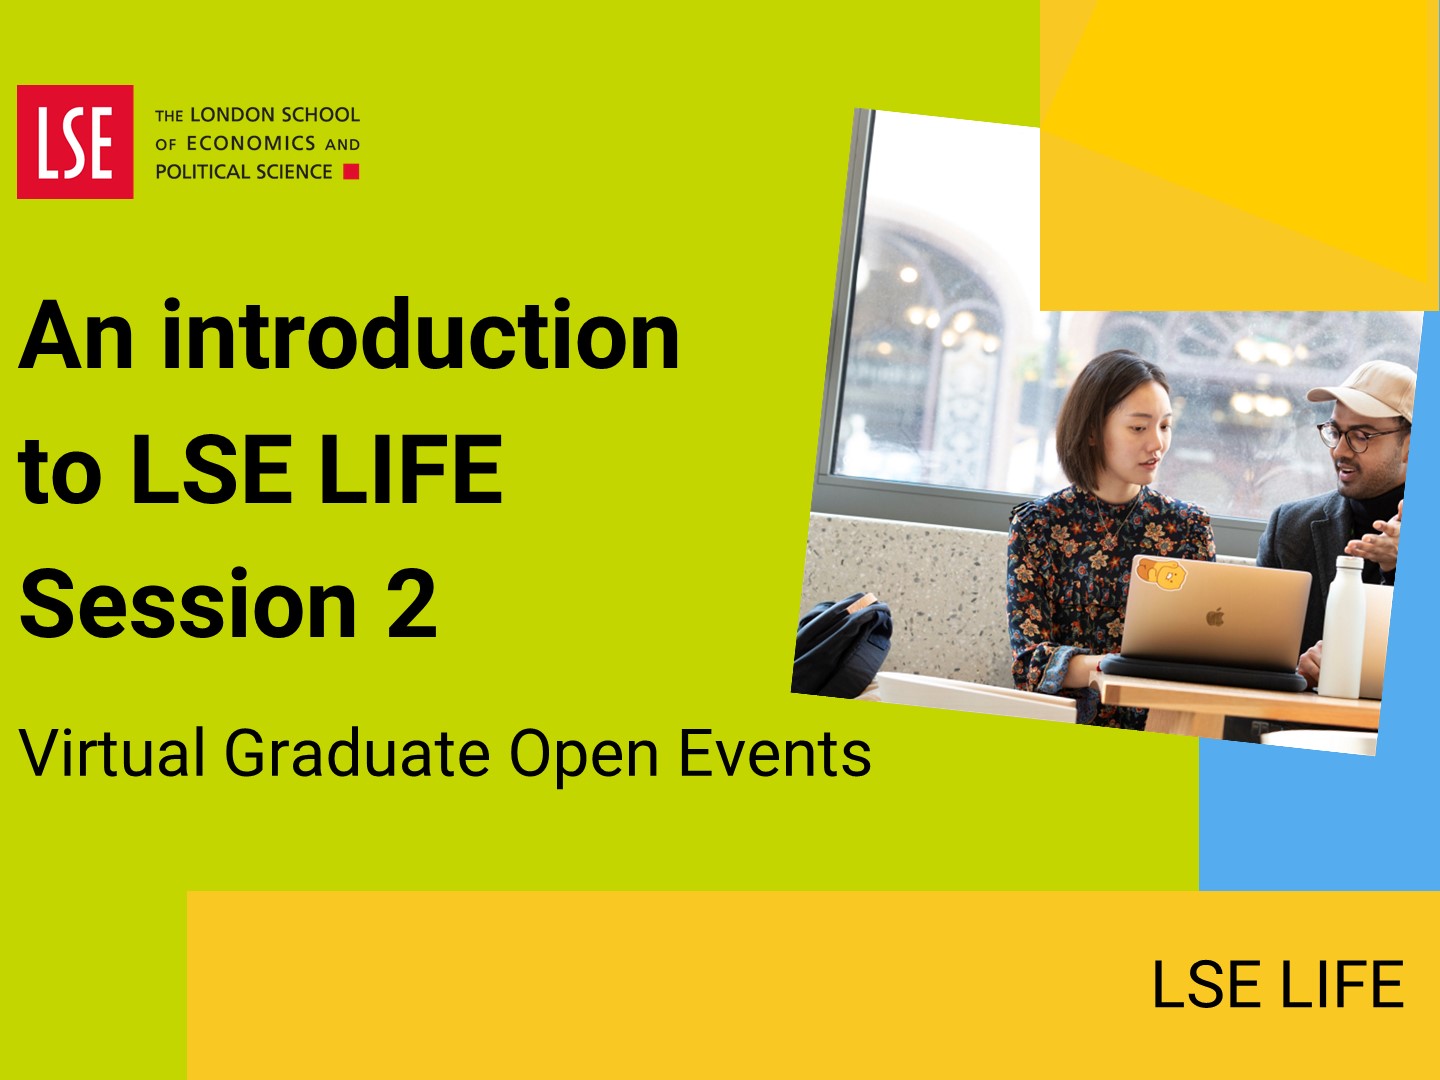 An introduction to LSE LIFE Session 2